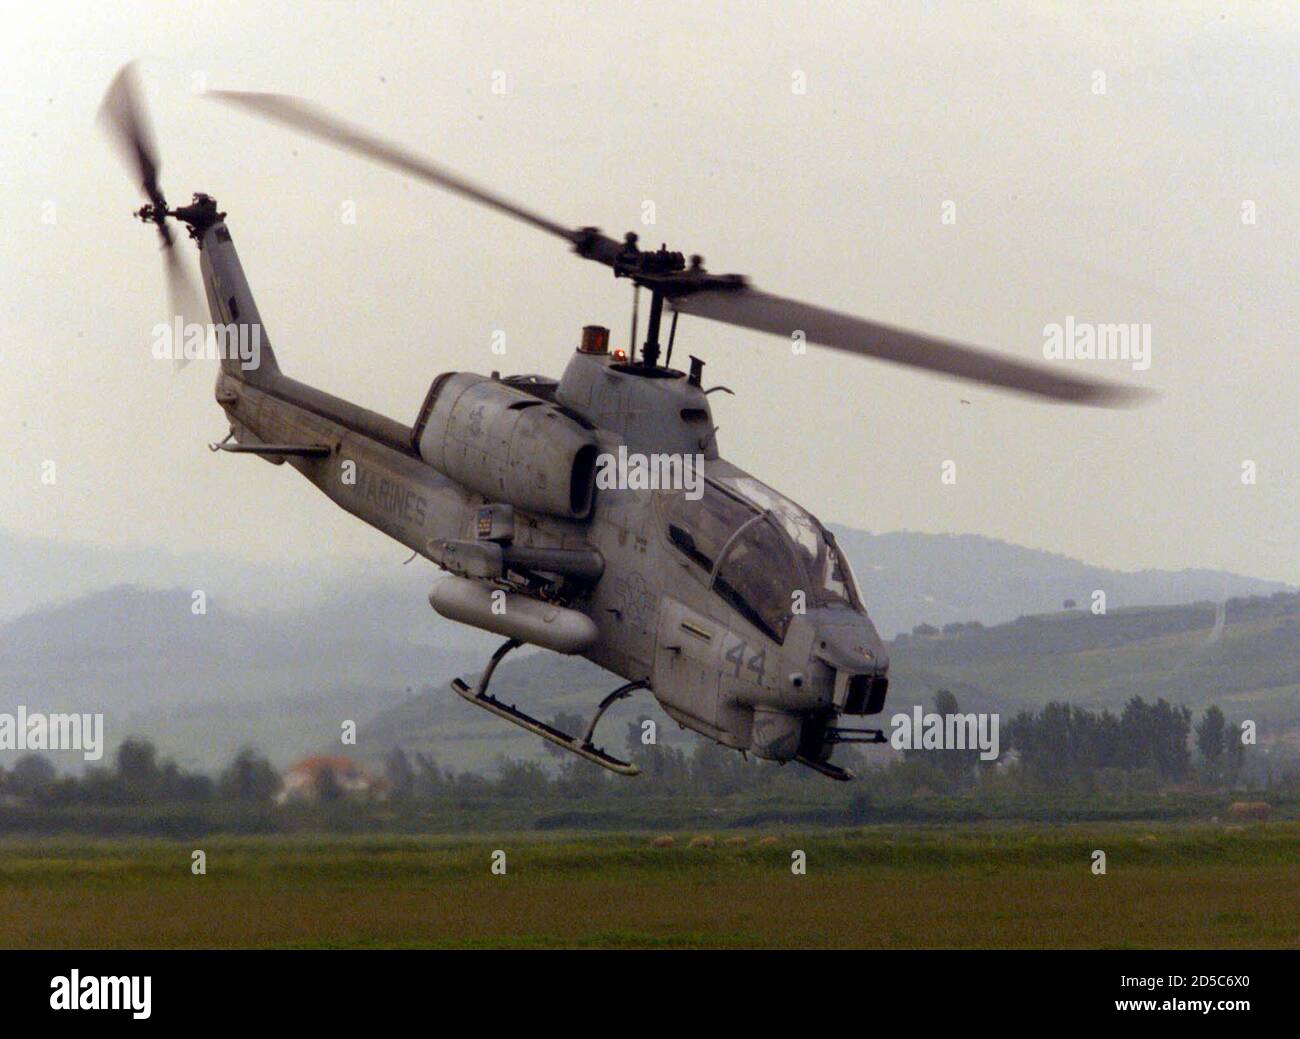 EDITORIAL USE ONLY - NO COMMERCIAL OR BOOK SALES. A U.S. Marines AH-1W Super Cobra gunship flies low over Albania May 9. The Aviation Combat Element (ACE) for the 26th Marine Expeditionary Unit (MEU) includes 12 CH-46E Sea Knight transport chopers, four CH-53E Super Stallion heavy-lift chopers, four AH-1W Super Cobra gunships, two UH-1N utility chopers and six AV-8B Harrier attack jets. **DIGITAL IMAGE** Stock Photo